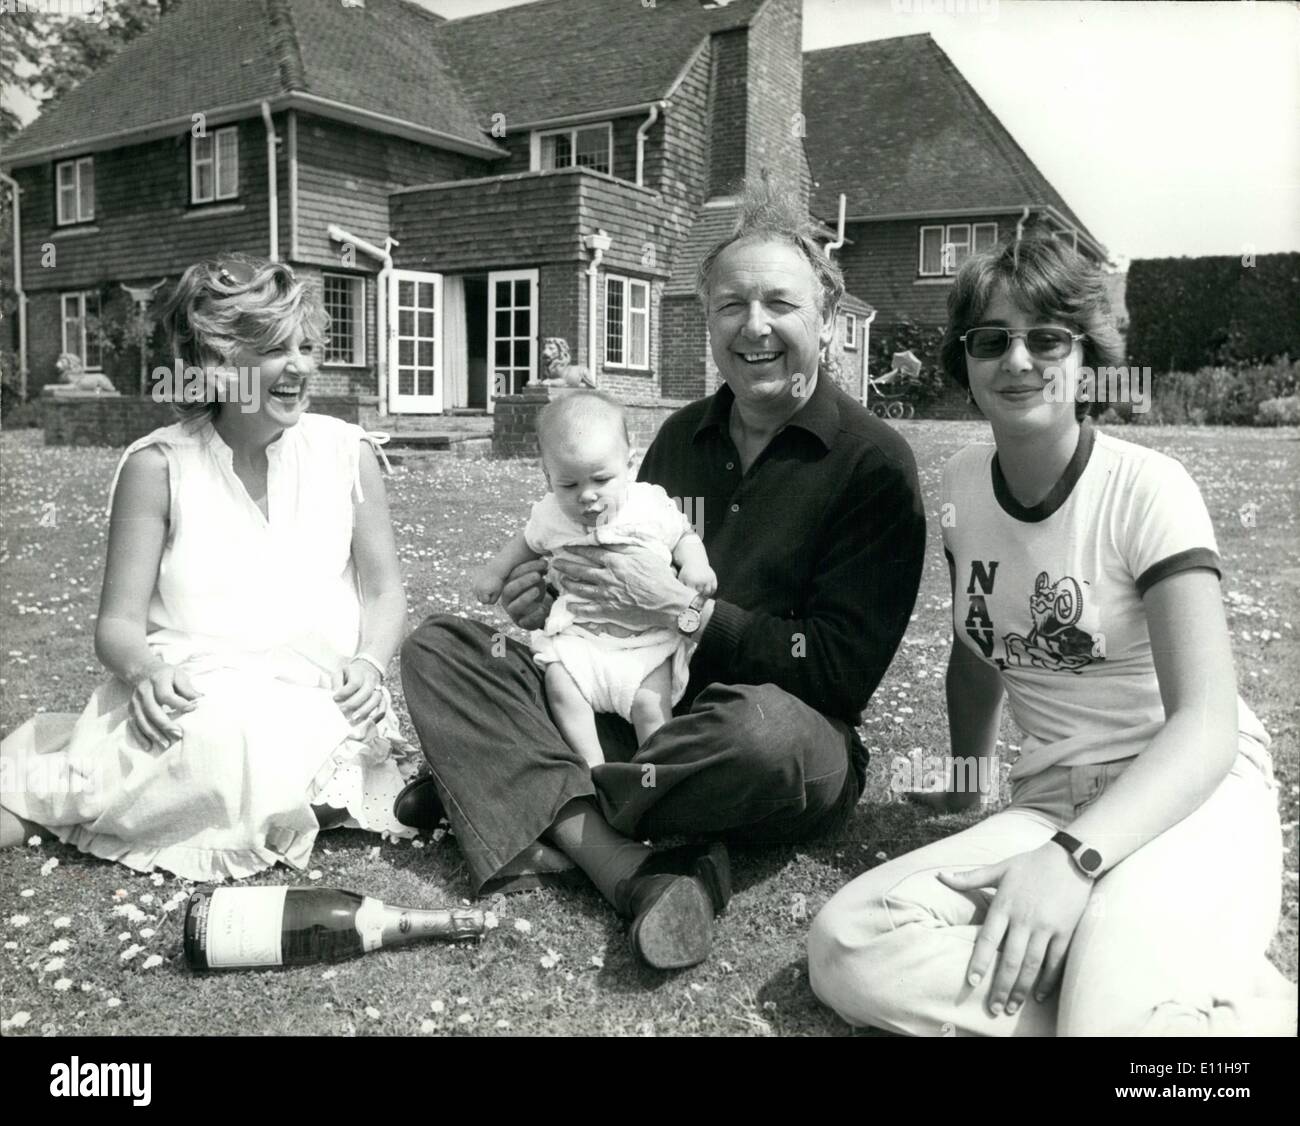 Jun. 06, 1978 - Sir Freddie Laker and his family celebrate in the sun: Sir Freddi Laker, 55, Pioneer of cheap flights, received Stock Photo